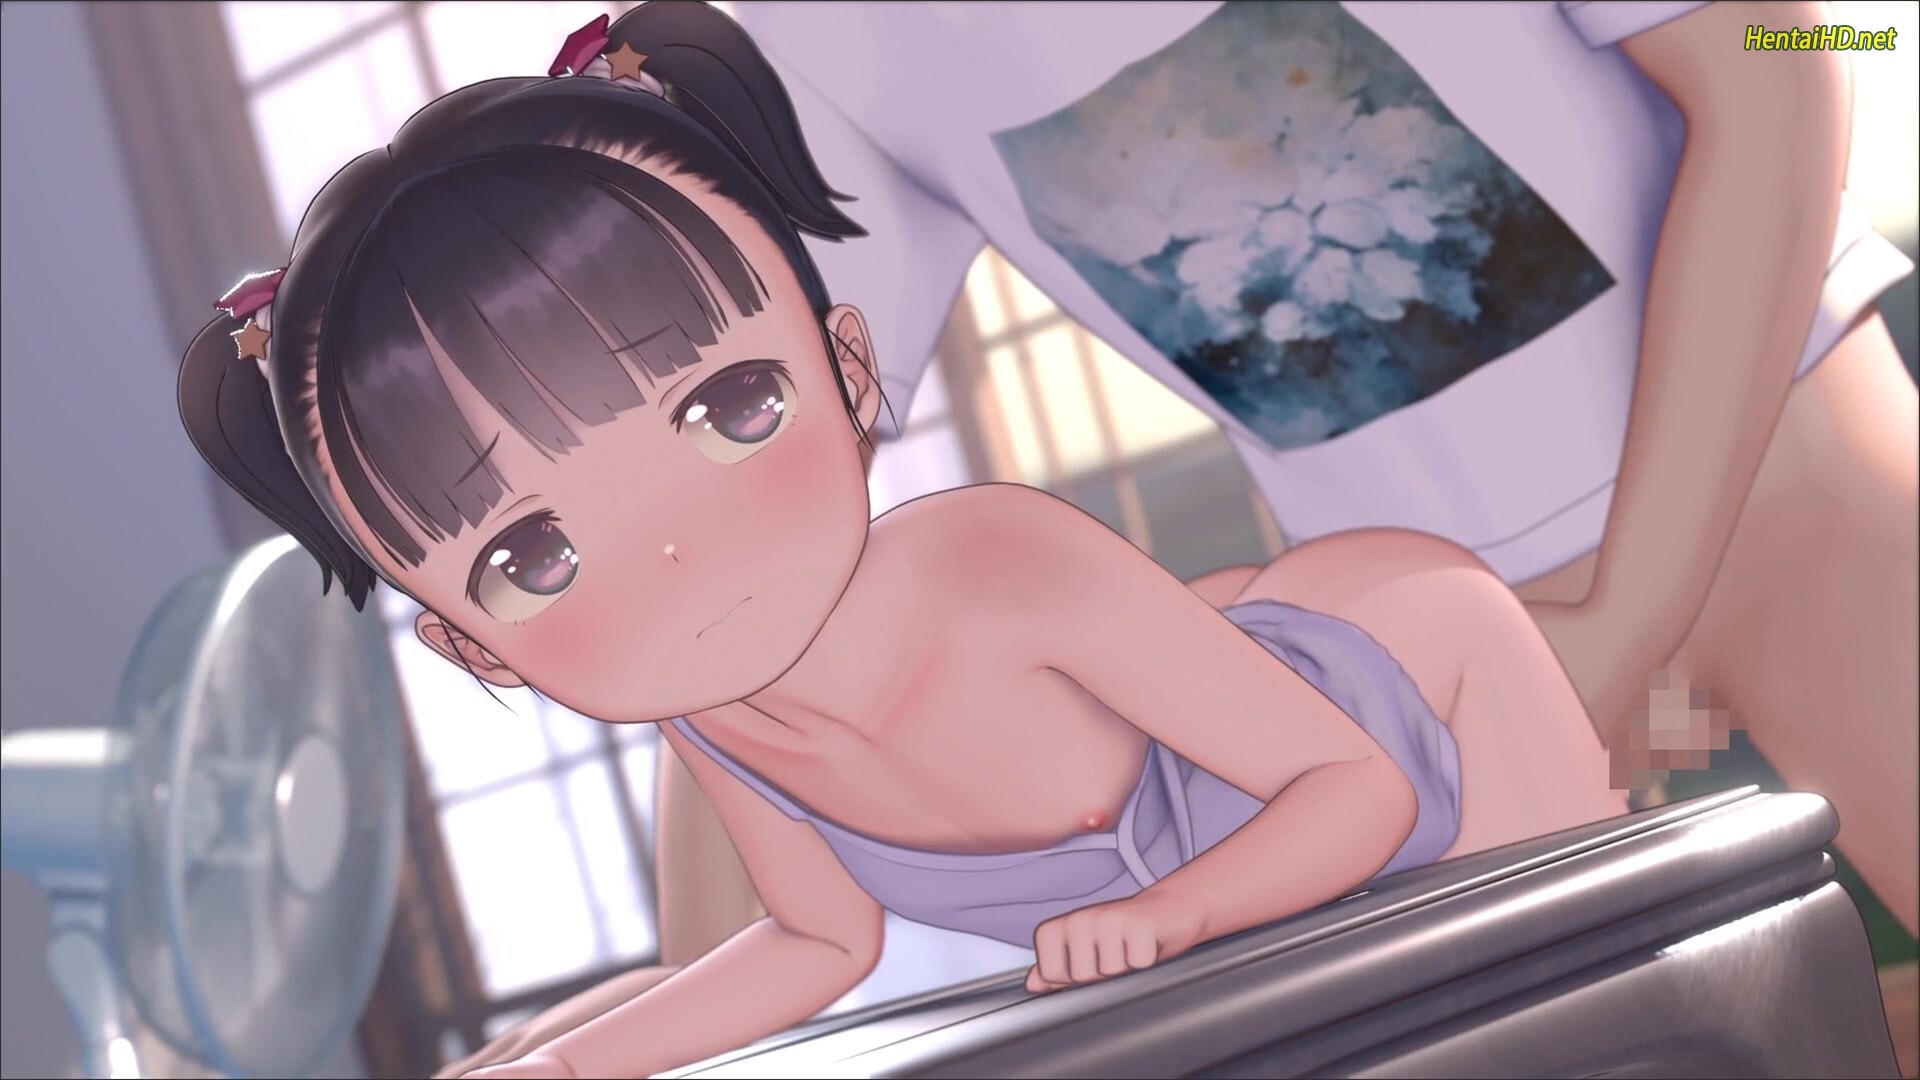 3d Anime Hentai Dvds - Watch Custom Udon Memories of Summer 3D hentai in HD quality for free |  HentaiHD.net